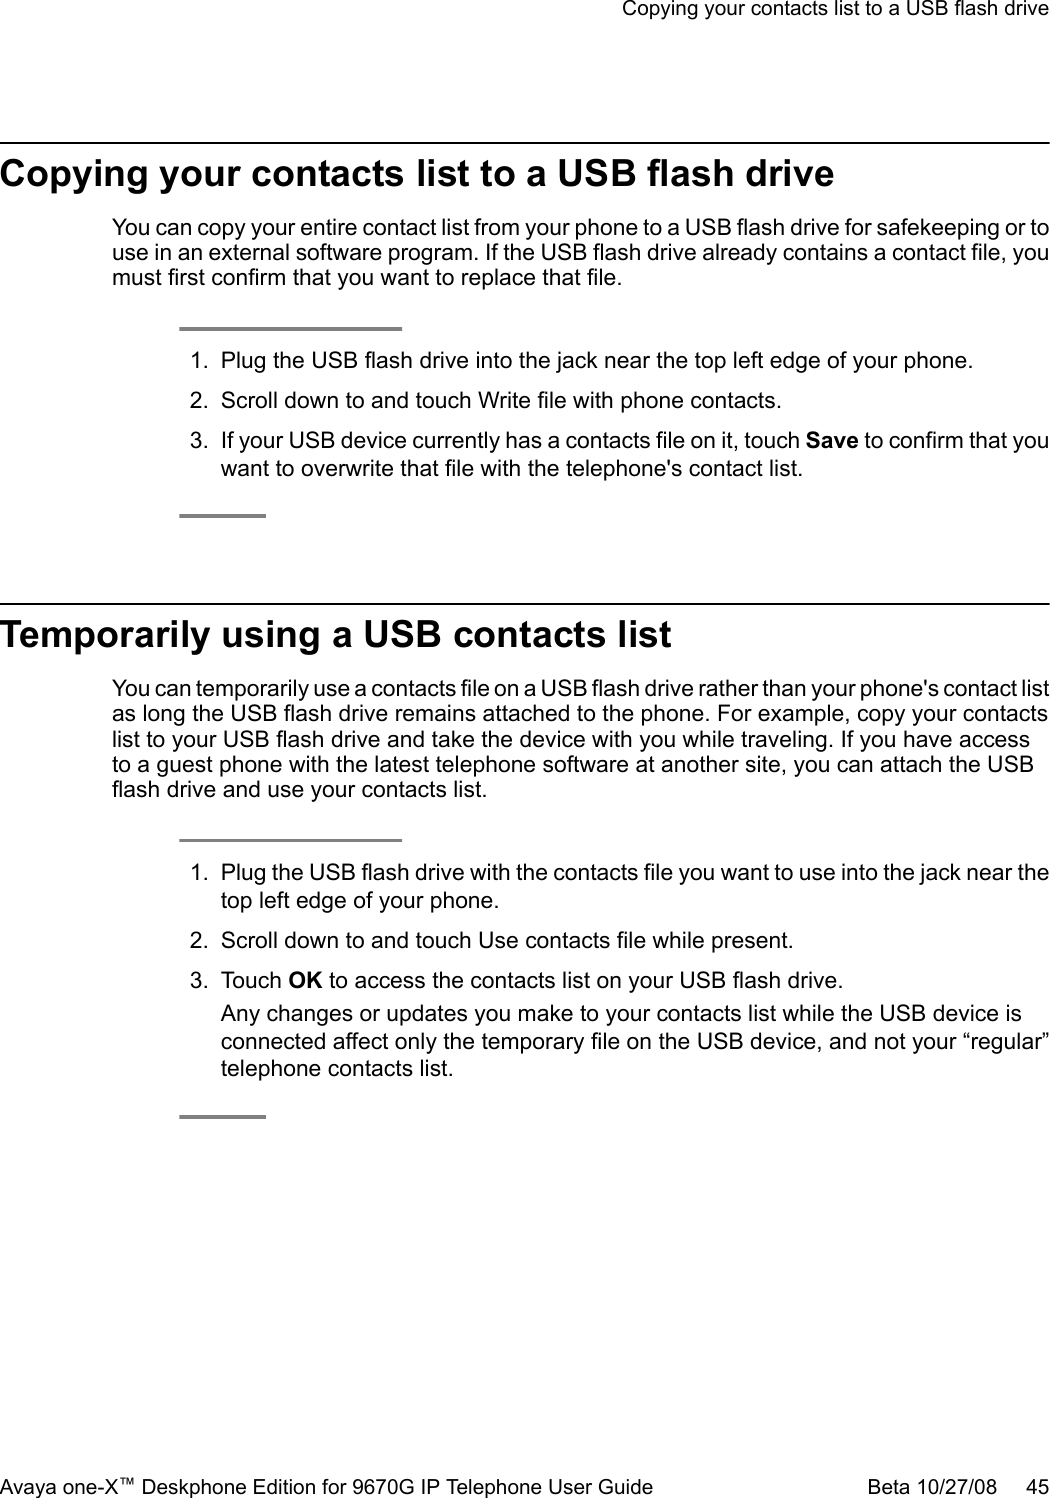 Copying your contacts list to a USB flash driveYou can copy your entire contact list from your phone to a USB flash drive for safekeeping or touse in an external software program. If the USB flash drive already contains a contact file, youmust first confirm that you want to replace that file.1. Plug the USB flash drive into the jack near the top left edge of your phone.2. Scroll down to and touch Write file with phone contacts.3. If your USB device currently has a contacts file on it, touch Save to confirm that youwant to overwrite that file with the telephone&apos;s contact list.Temporarily using a USB contacts listYou can temporarily use a contacts file on a USB flash drive rather than your phone&apos;s contact listas long the USB flash drive remains attached to the phone. For example, copy your contactslist to your USB flash drive and take the device with you while traveling. If you have accessto a guest phone with the latest telephone software at another site, you can attach the USBflash drive and use your contacts list.1. Plug the USB flash drive with the contacts file you want to use into the jack near thetop left edge of your phone.2. Scroll down to and touch Use contacts file while present.3. Touch OK to access the contacts list on your USB flash drive.Any changes or updates you make to your contacts list while the USB device isconnected affect only the temporary file on the USB device, and not your “regular”telephone contacts list.Copying your contacts list to a USB flash driveAvaya one-X™ Deskphone Edition for 9670G IP Telephone User Guide Beta 10/27/08     45